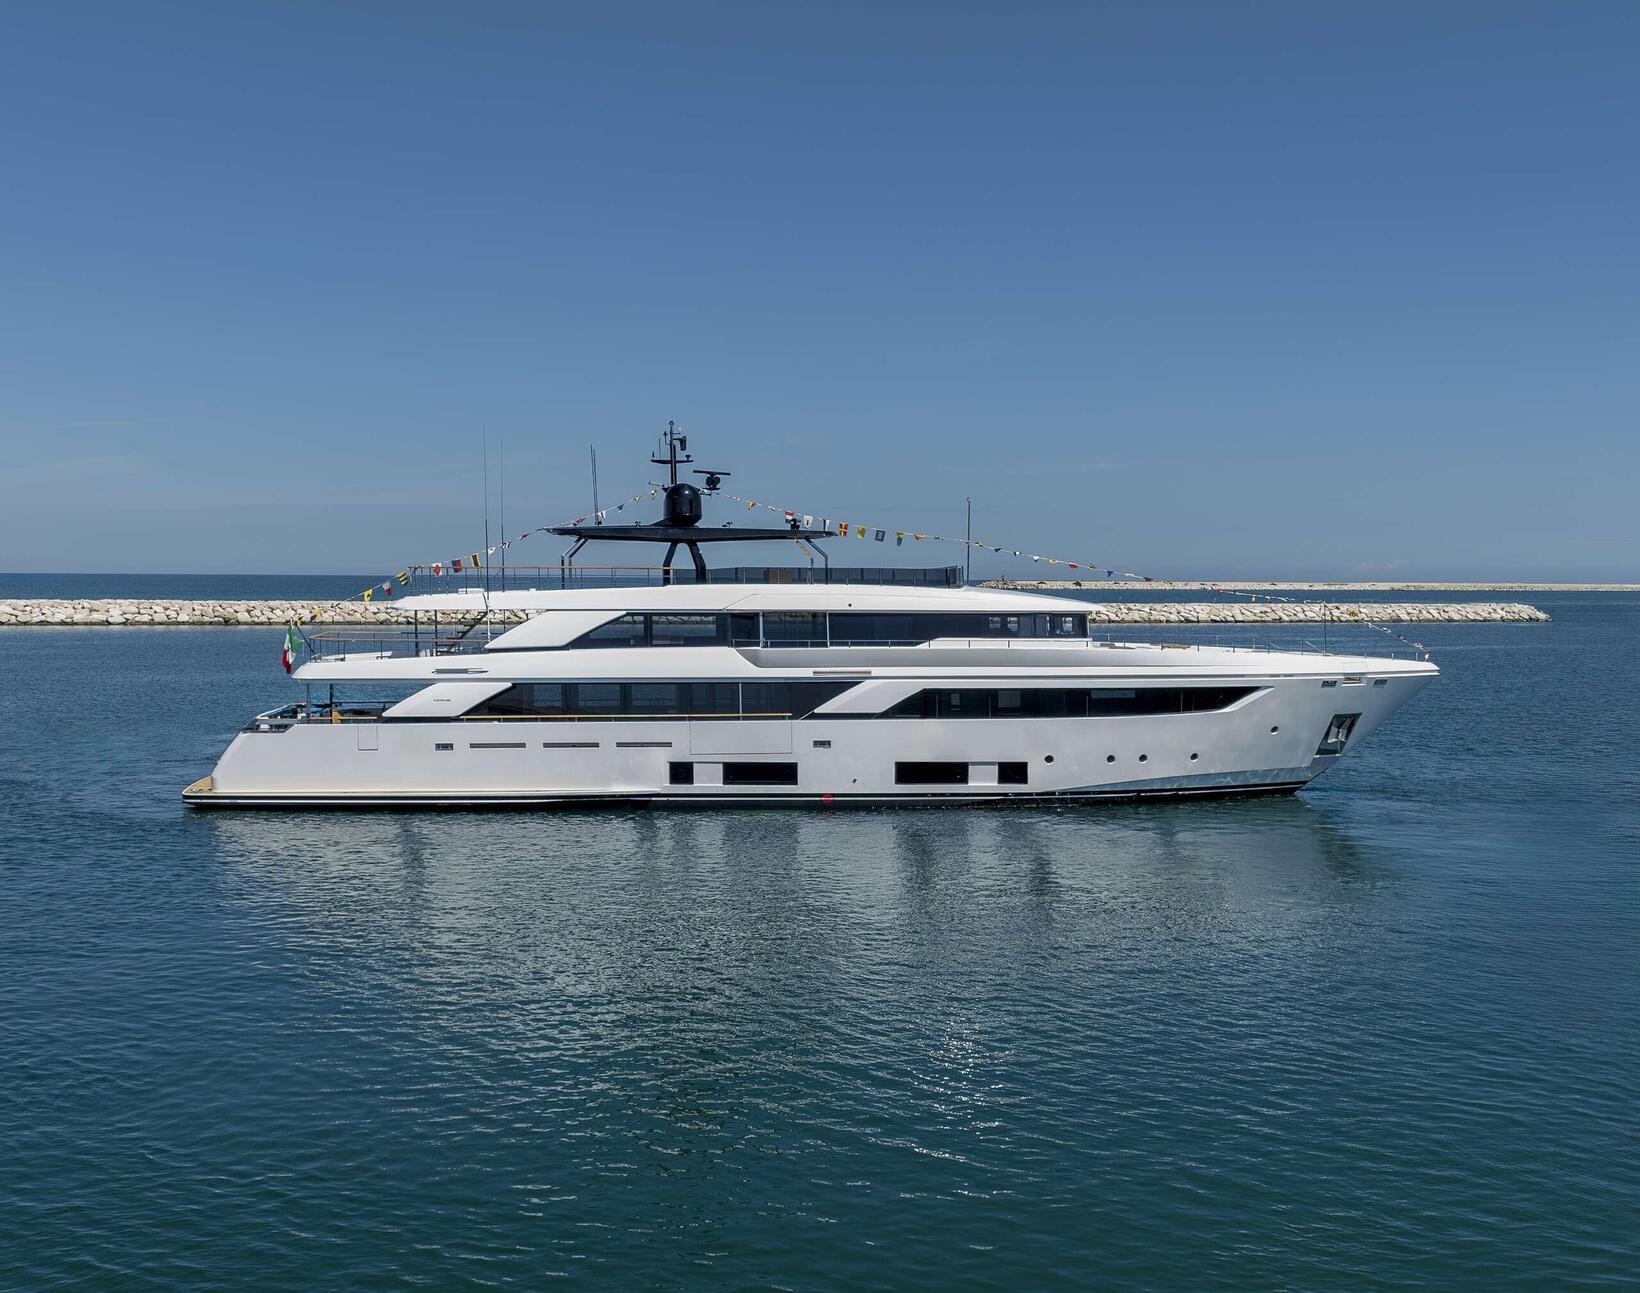 CUSTOM LINE LAUNCHES FIVE SUPERYACHTS IN A MONTH